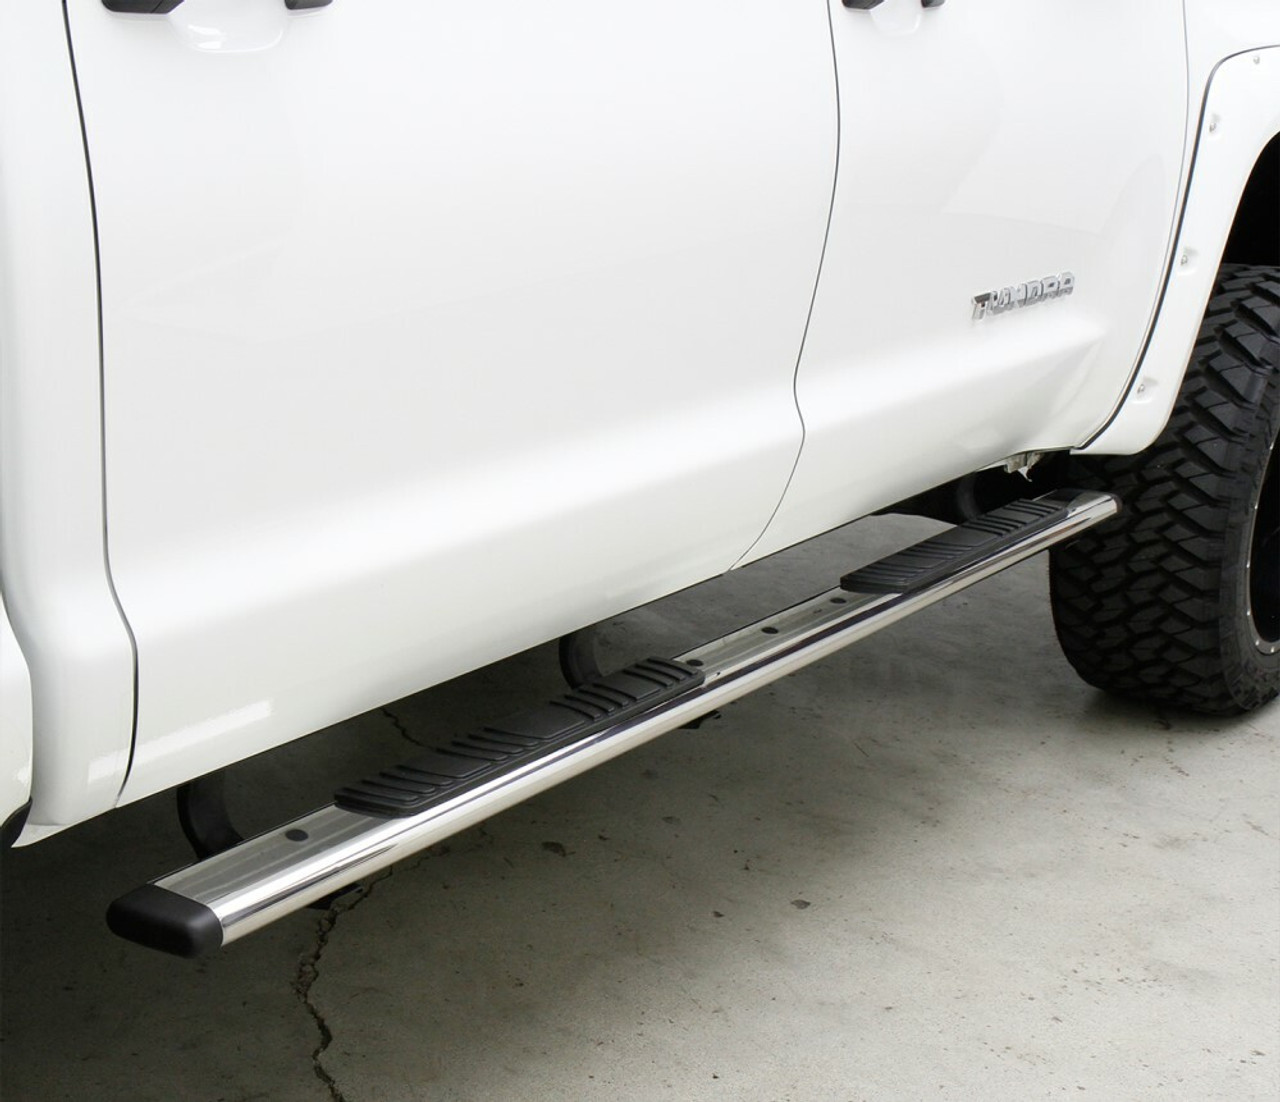 Go Rhino 685404387T Chevrolet, Silverado 2500HD, 3500HD, 2015 - 2019, 5 inch OE Xtreme Low Profile - Complete Kit: Galvanized Steel, Textured black, 650087T side bars + 6840435 OE Xtreme Brackets. 5 inch wide x 87 inch long side bars, Diesel only